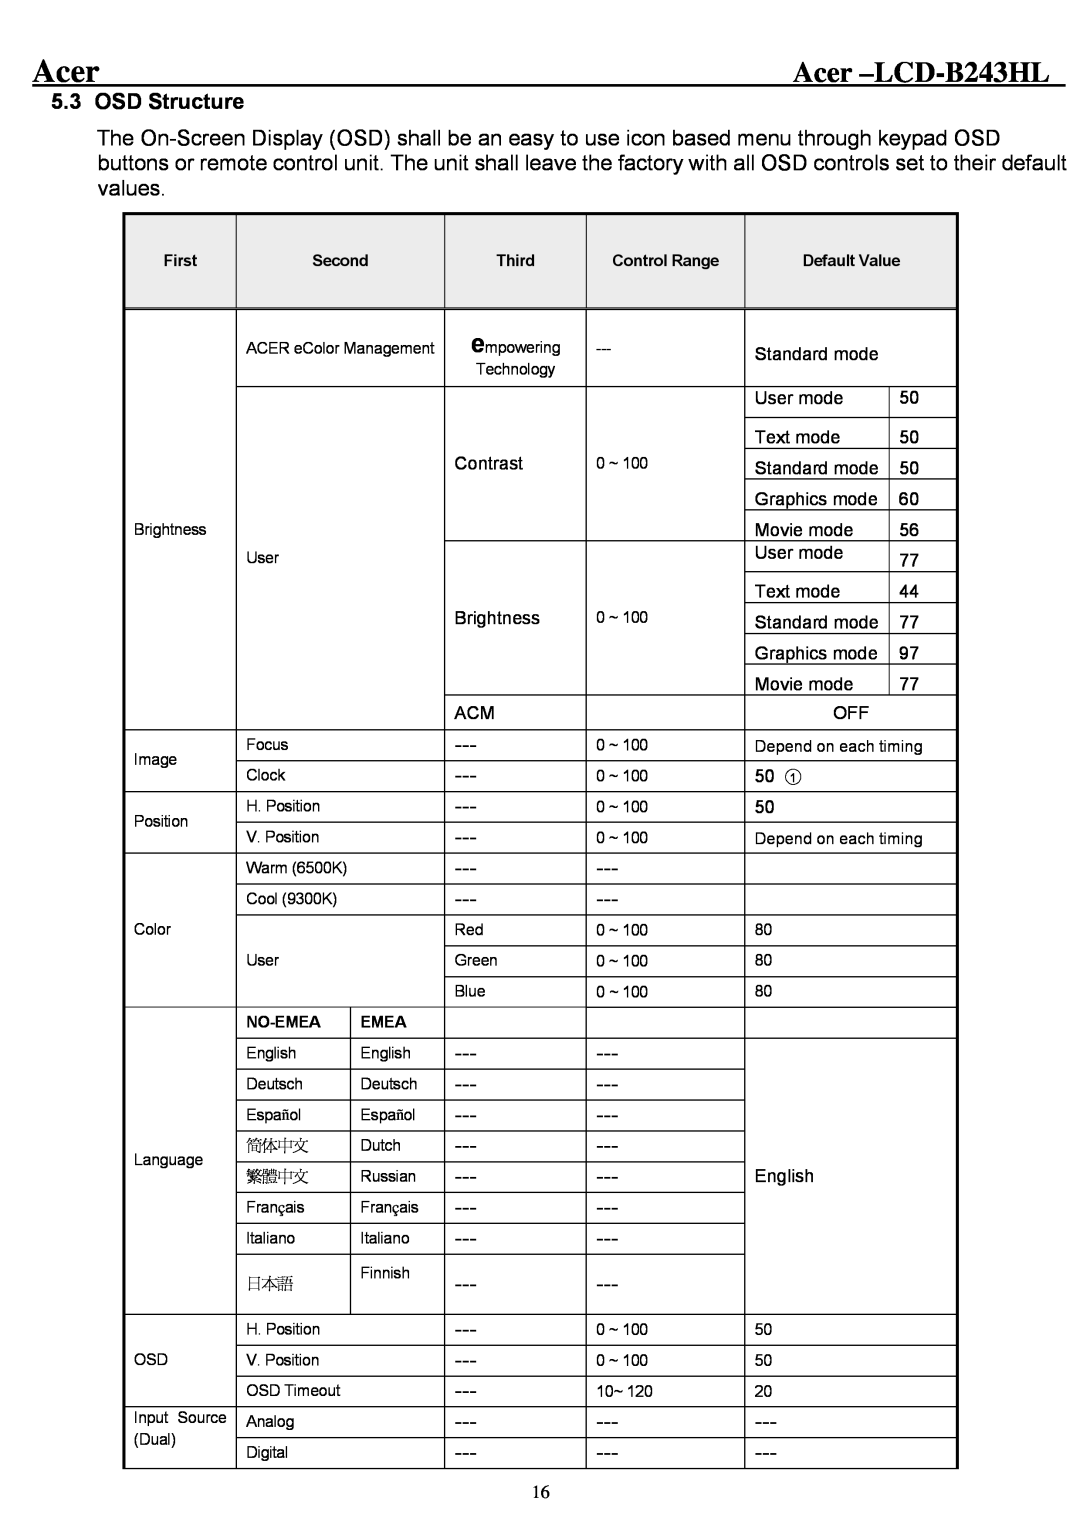 Acer service manual OSD Structure, Acer -LCD-B243HL, First, Second, Third, Control Range, Default Value, No-Emea 